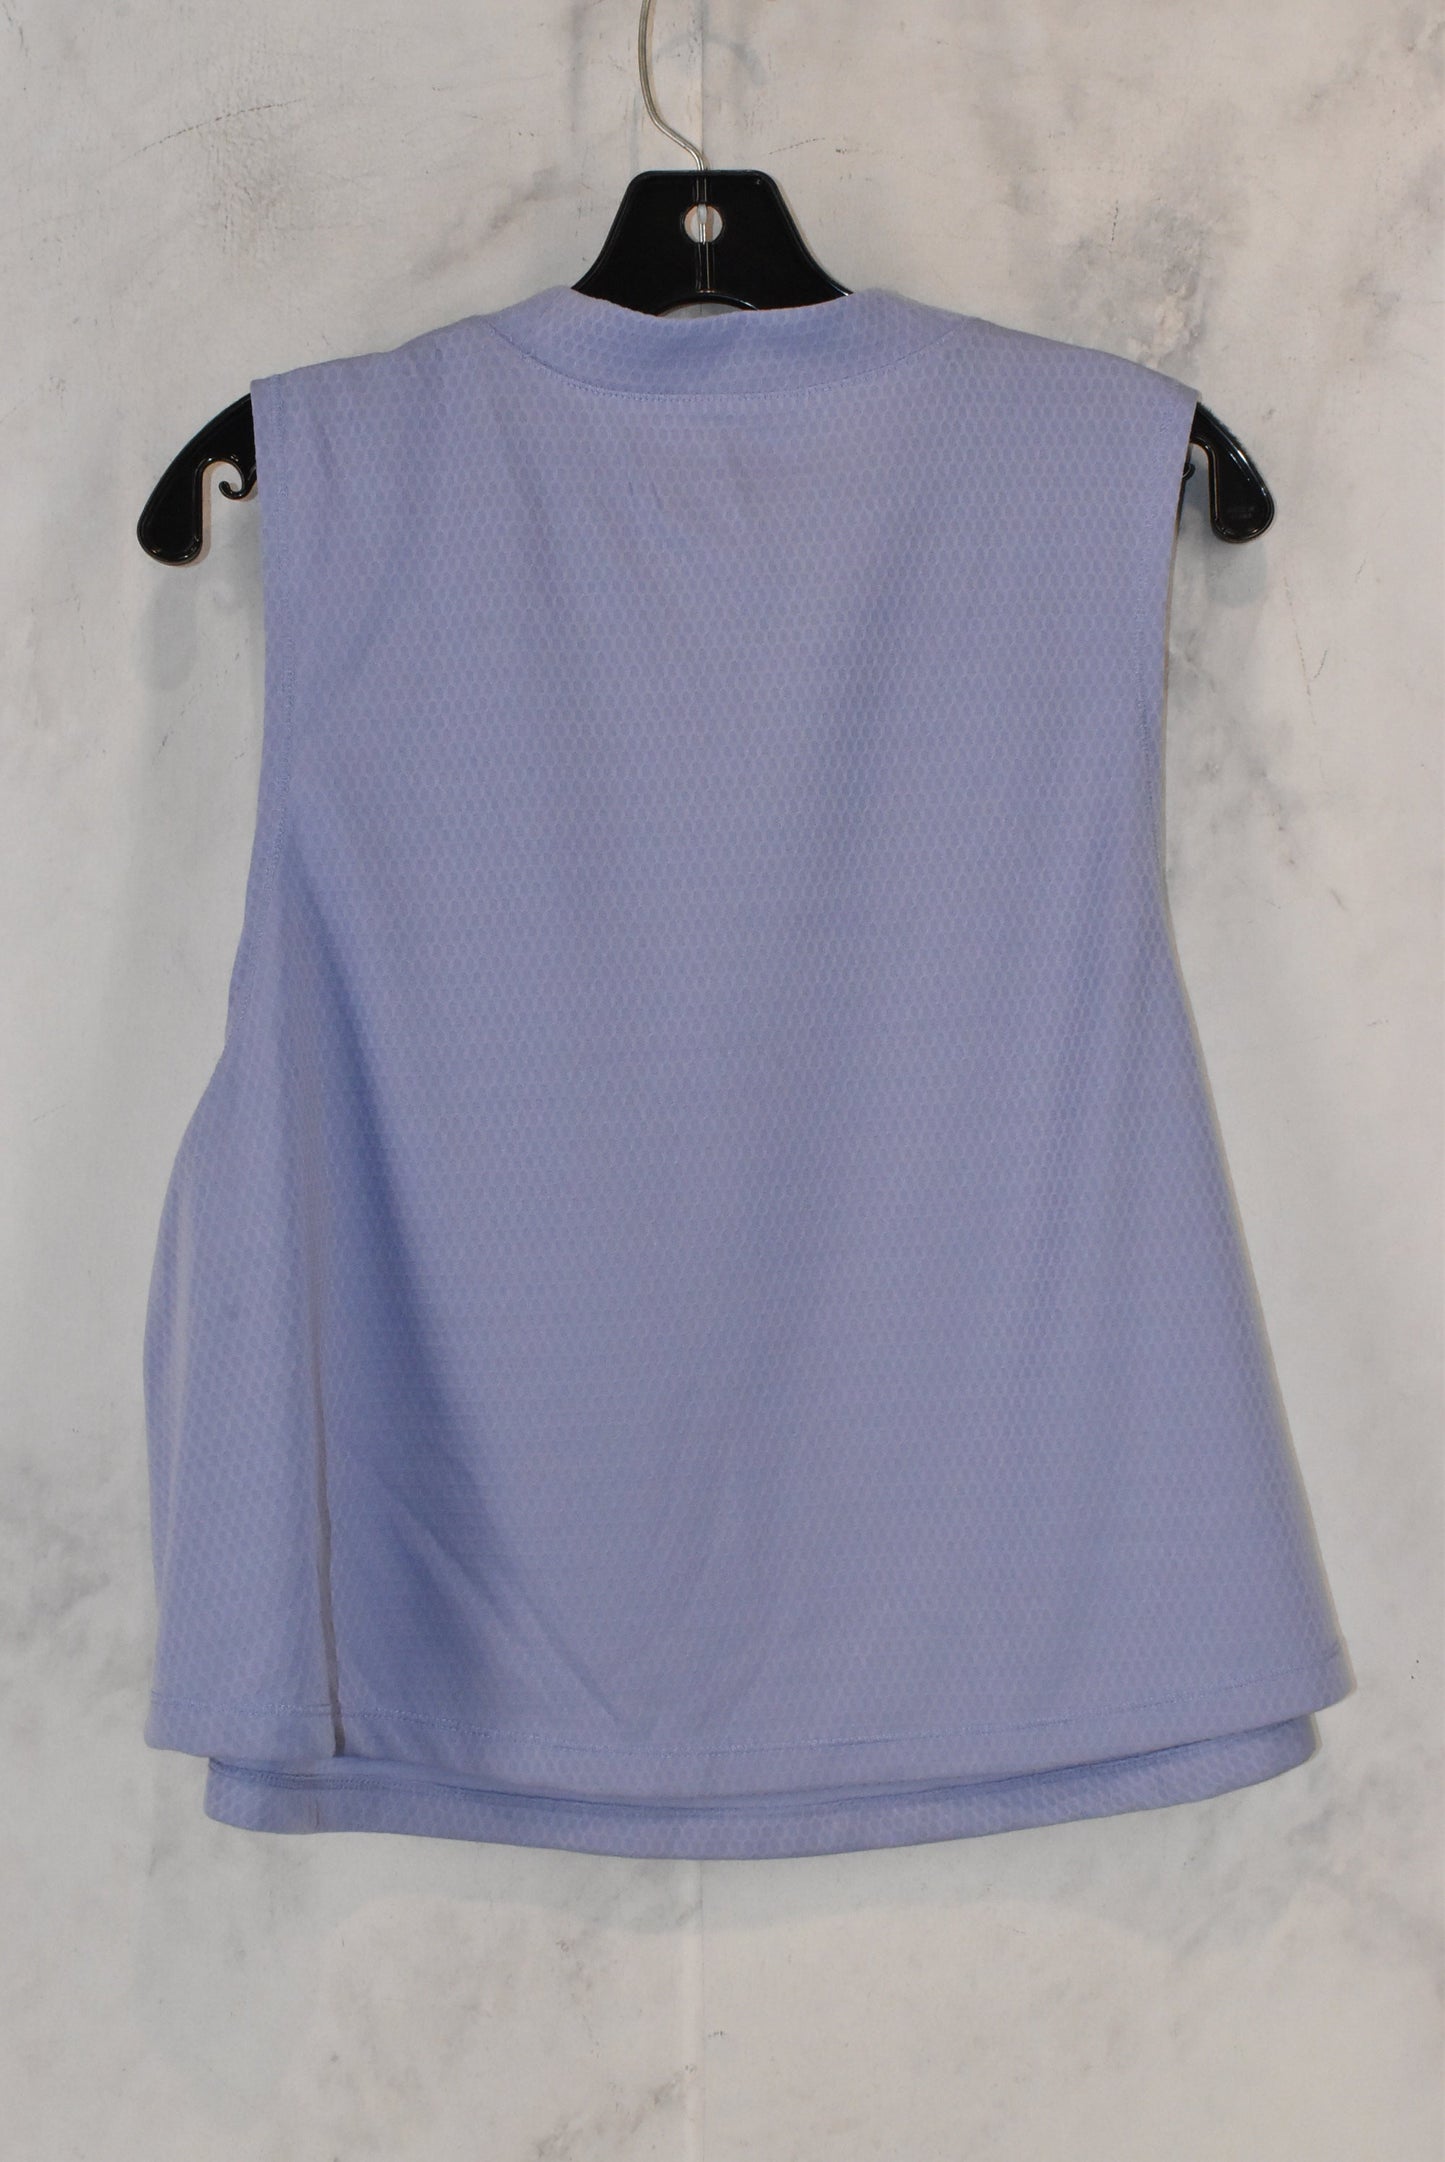 Athletic Tank Top By Dsg Outerwear  Size: 2x